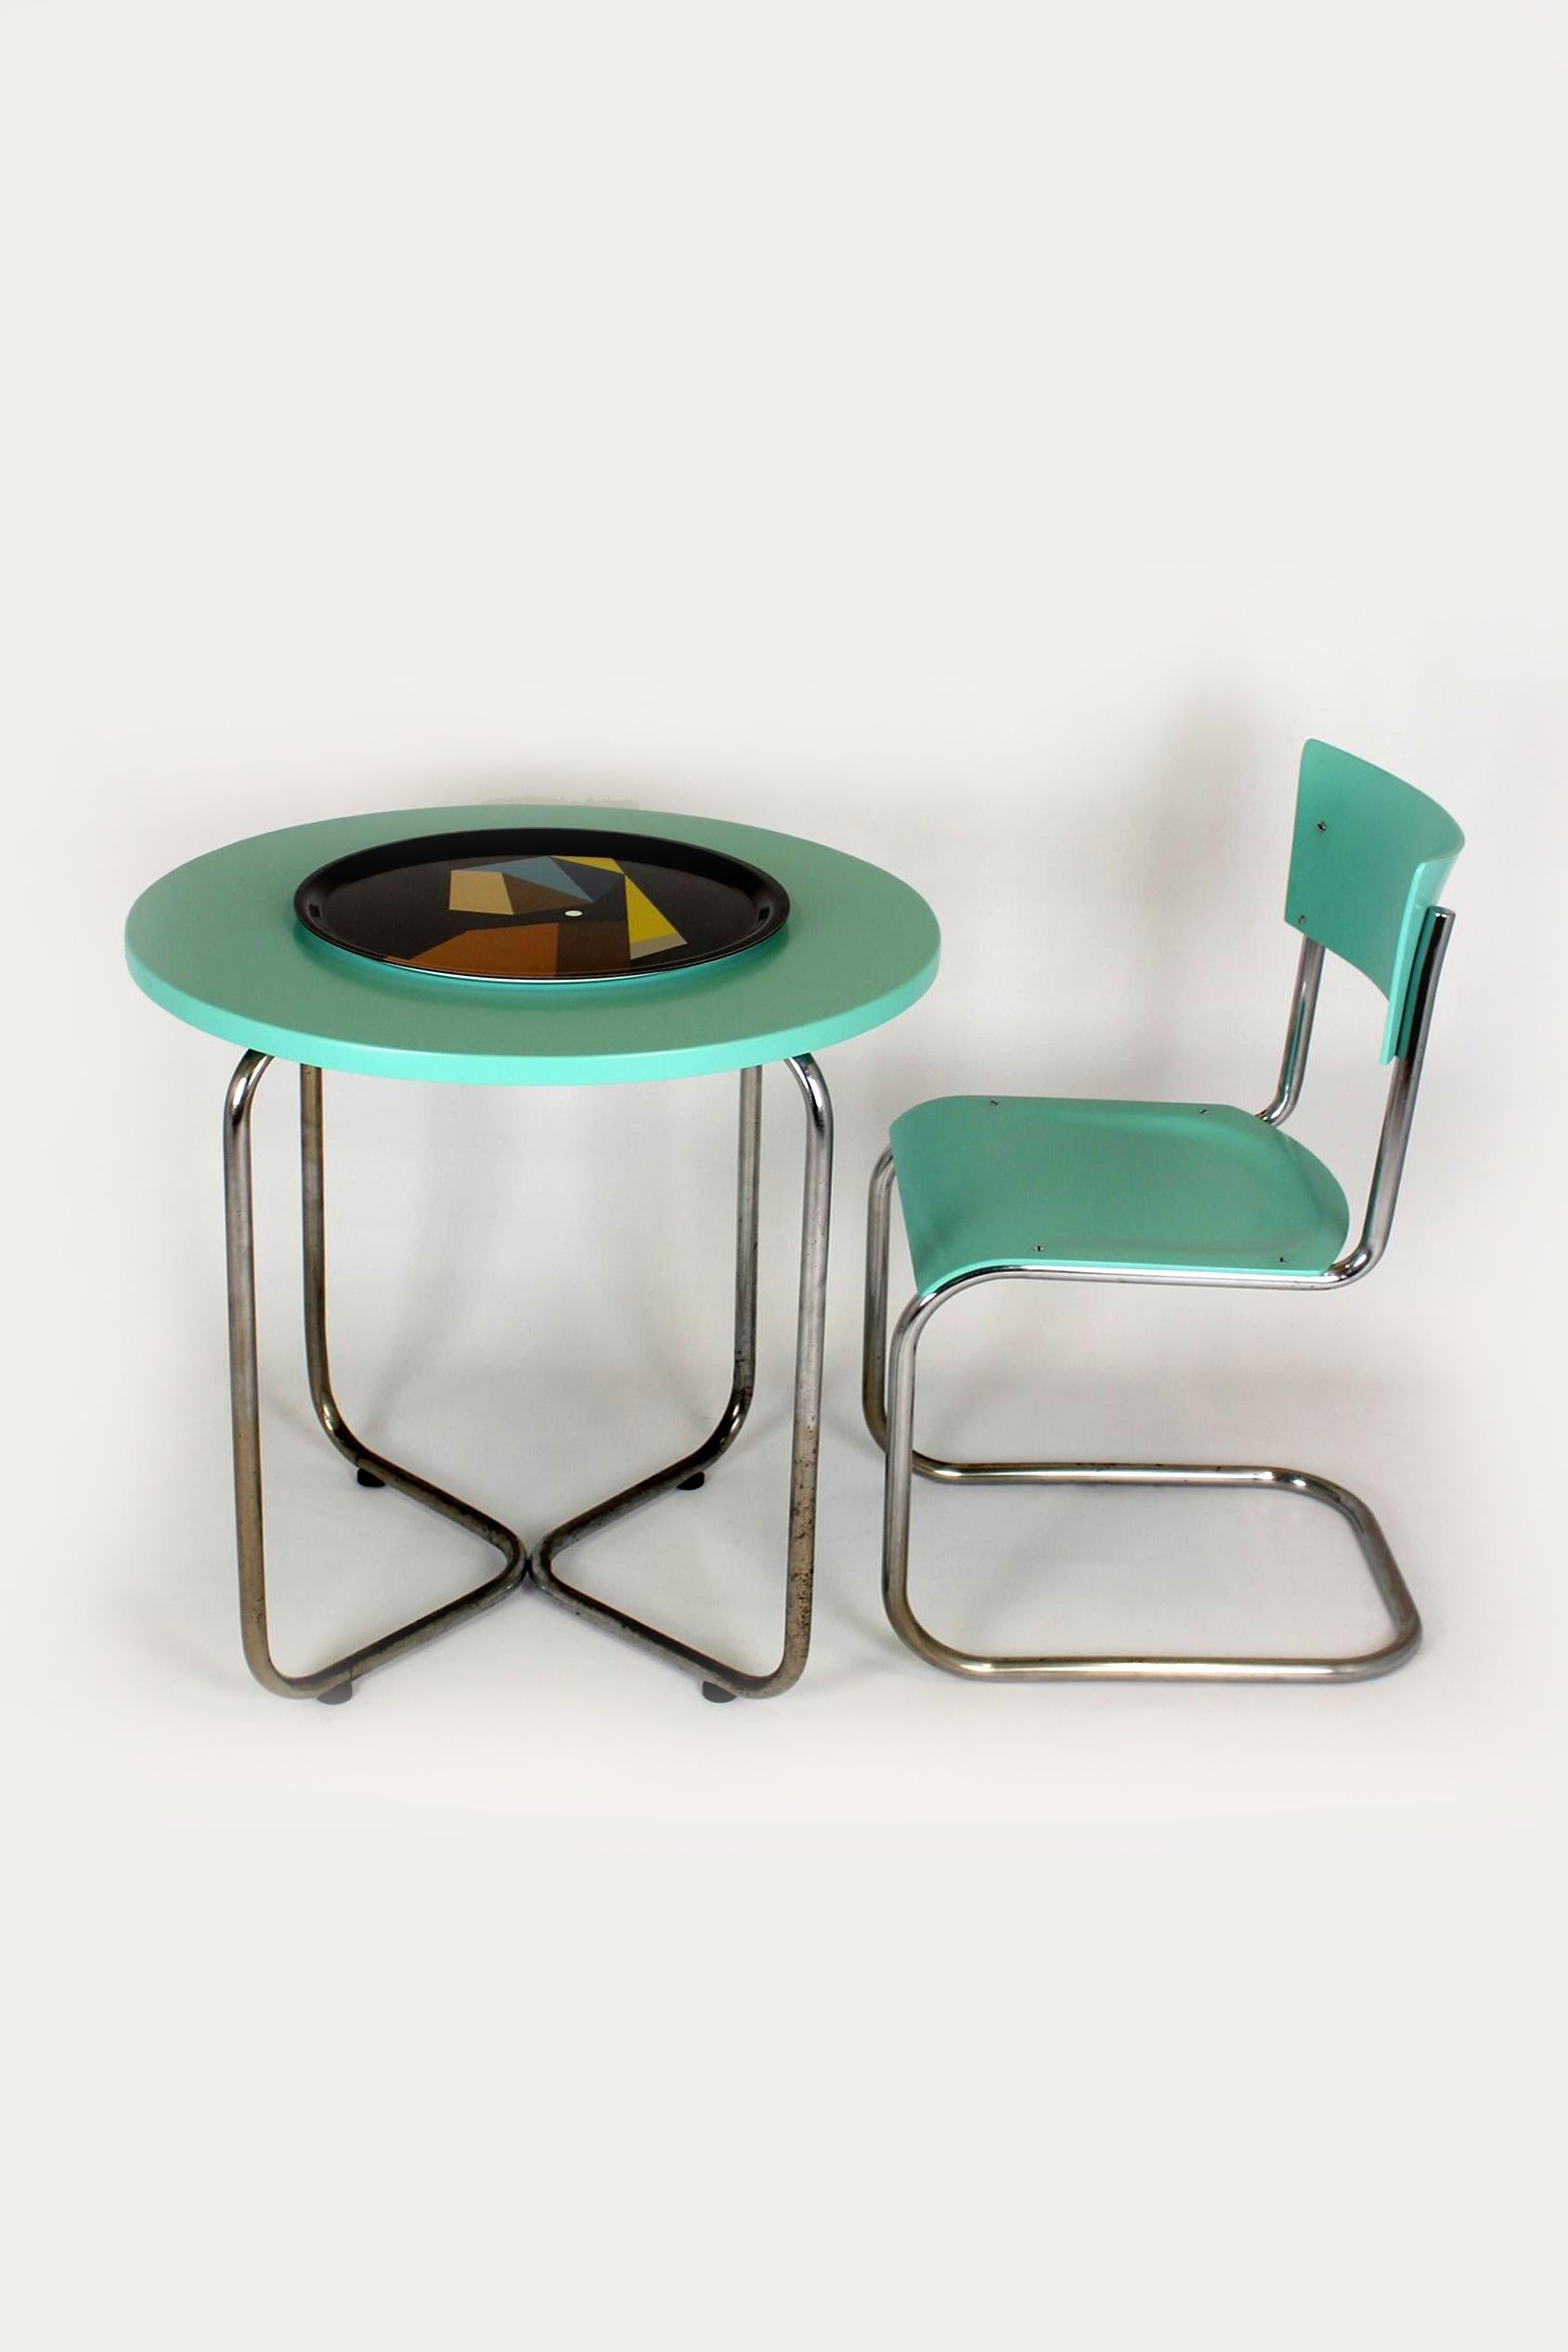 This Bauhaus style set was produced in the 1930s in Czechoslovakia. The set consists of a round table and one chair (S43) designed by Mart Stam. The furniture is made of chrome tubular steel and wood and was manufactured probably by Thonet or one of